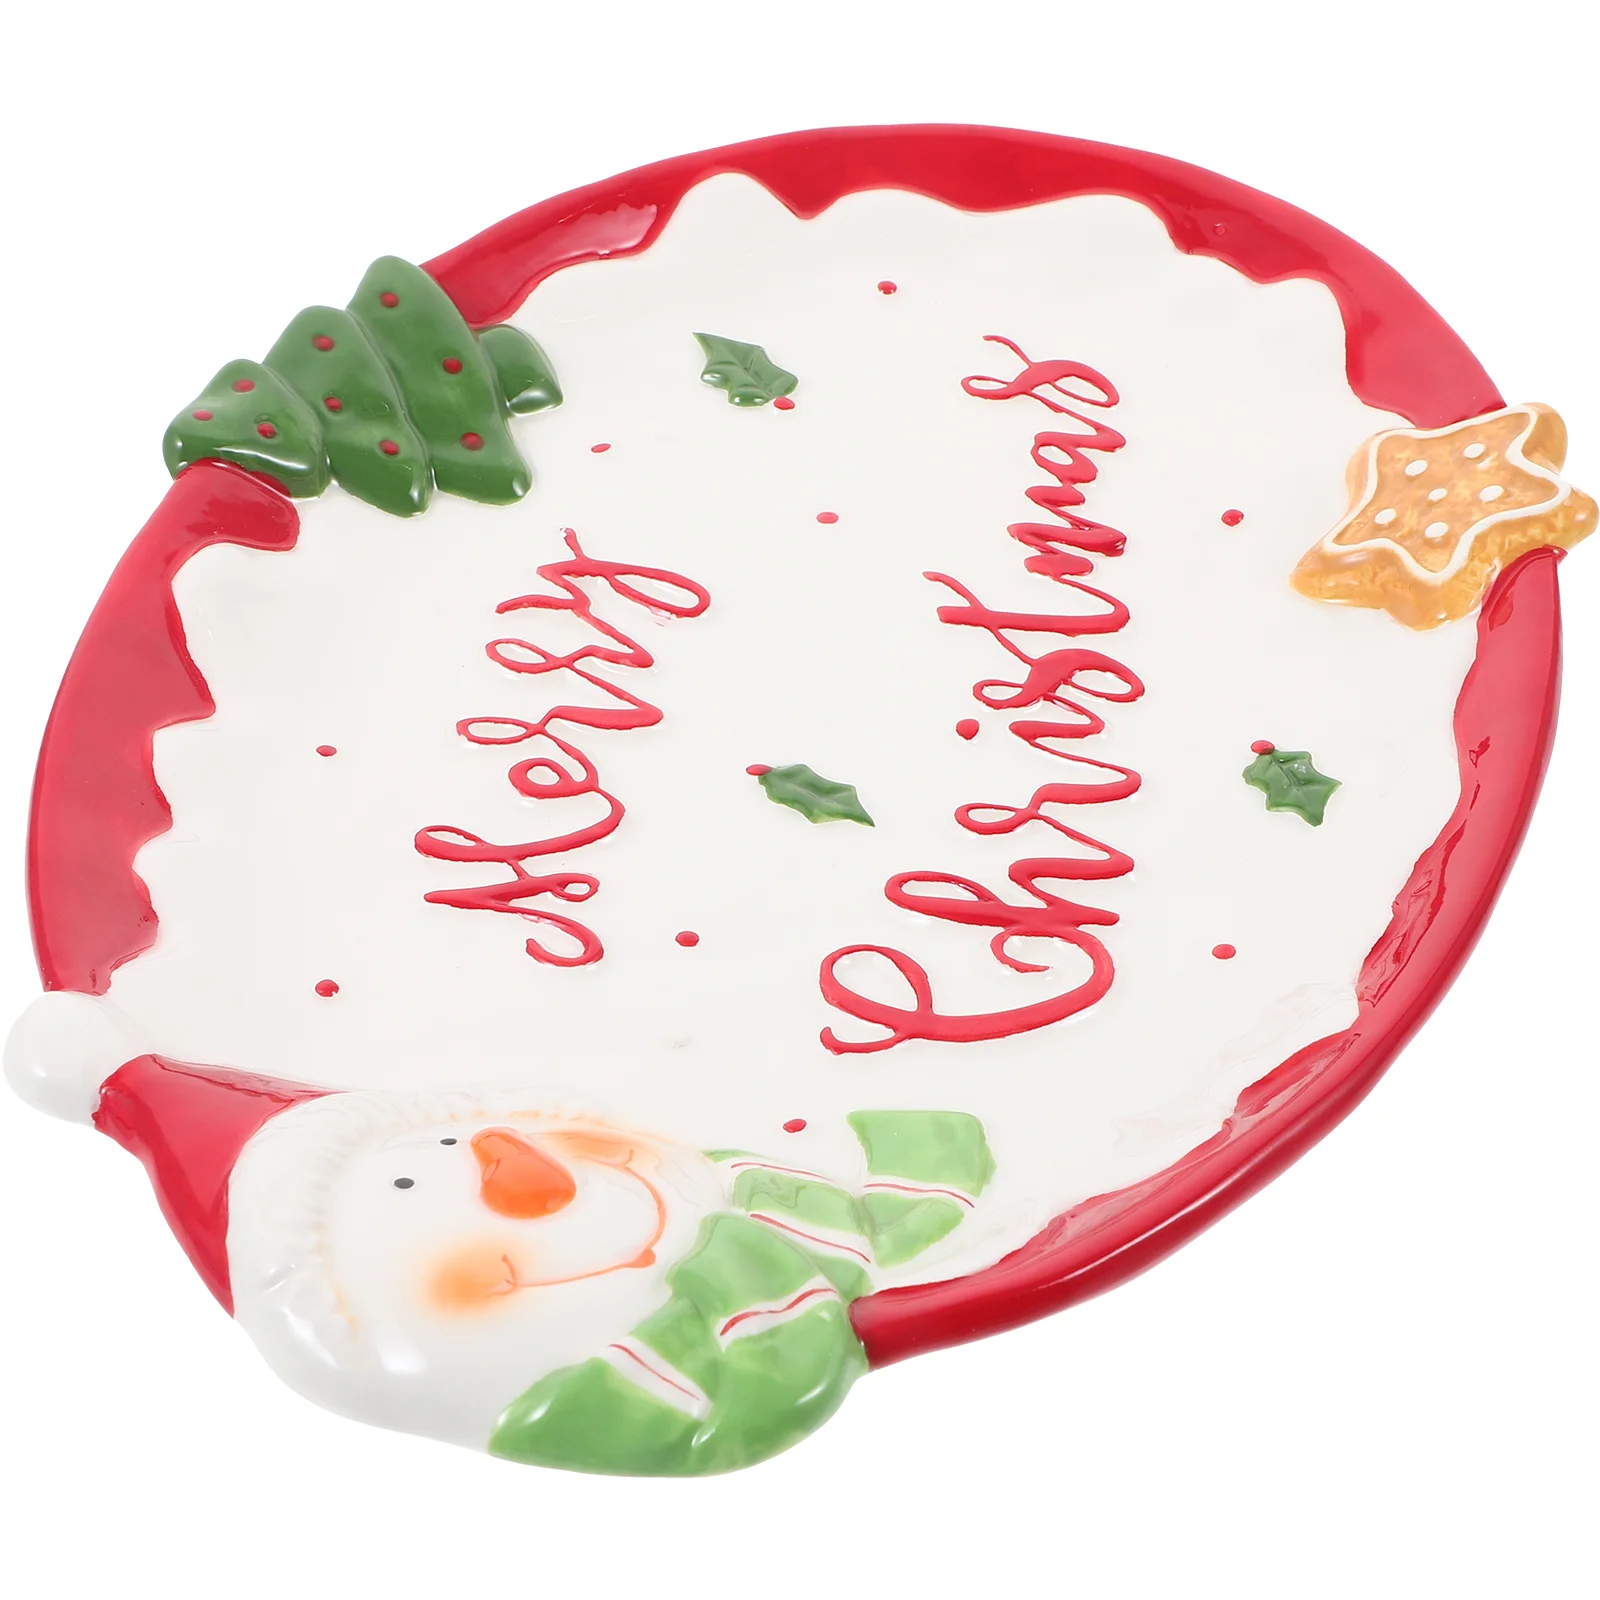 

Cutlery Christmas Ceramic Plate Serving Trays Snowman Dip Bowl Snack Holder Sauce Dishes Breakfast Plates Decoration Dessert